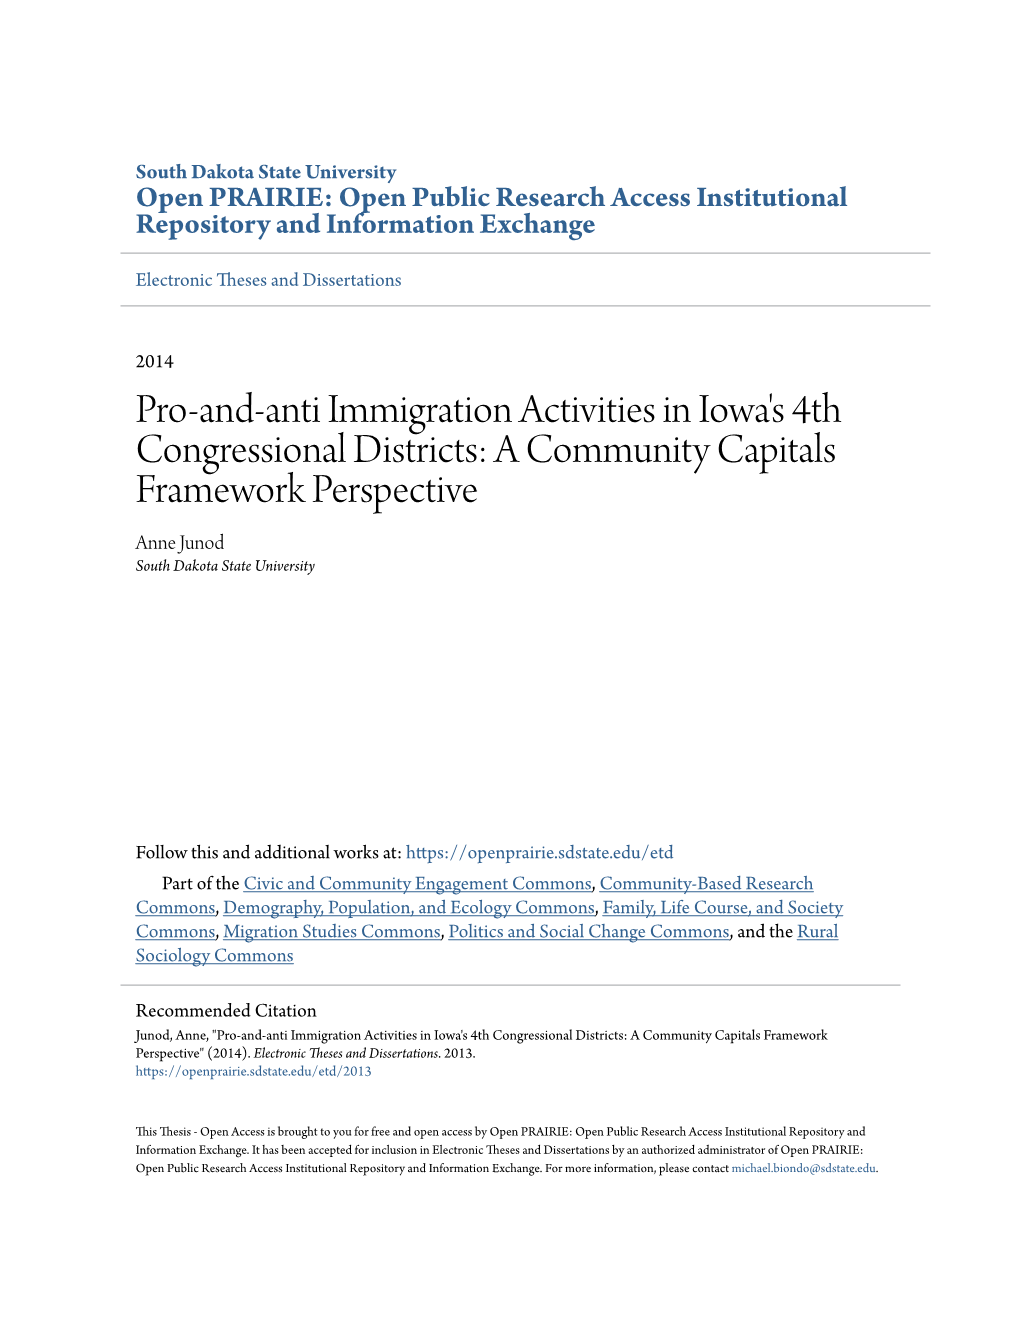 Pro-And-Anti Immigration Activities in Iowa's 4Th Congressional Districts: a Community Capitals Framework Perspective Anne Junod South Dakota State University